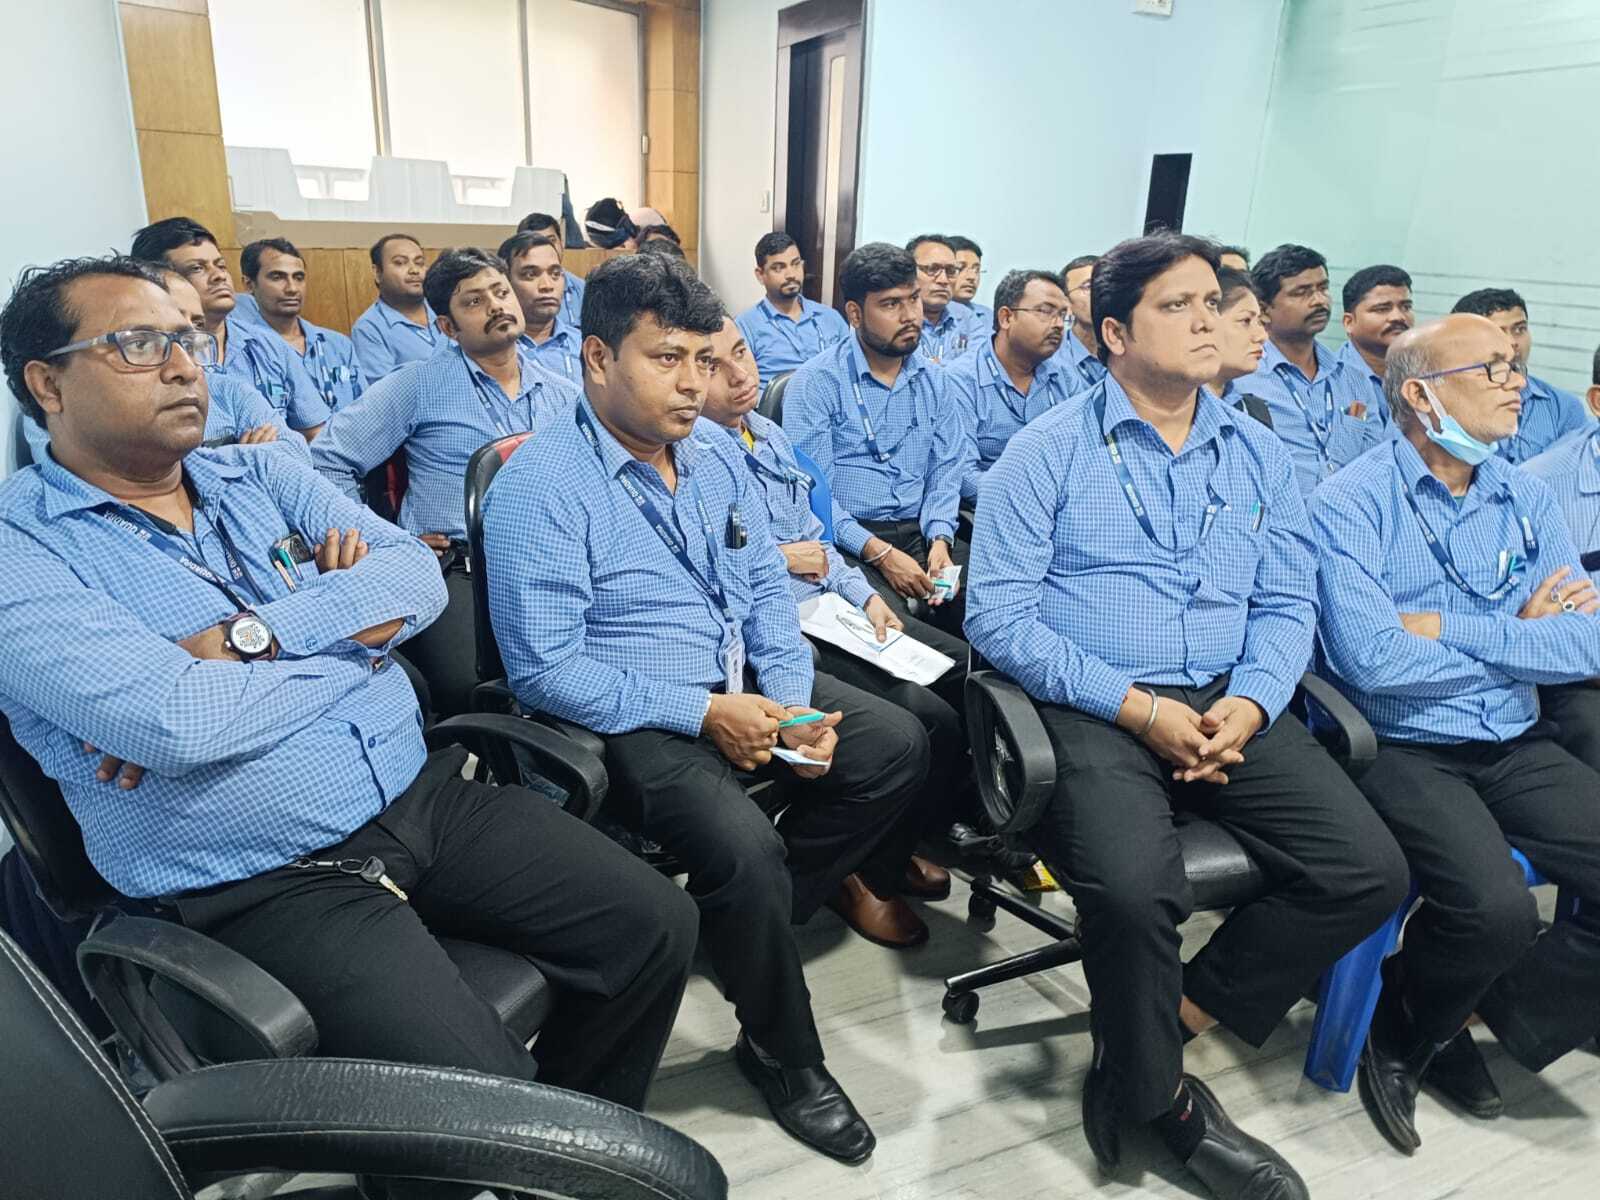 We conducted CME program on Dispojekt & Blood collection Procedure at Quadra Medical Services, 